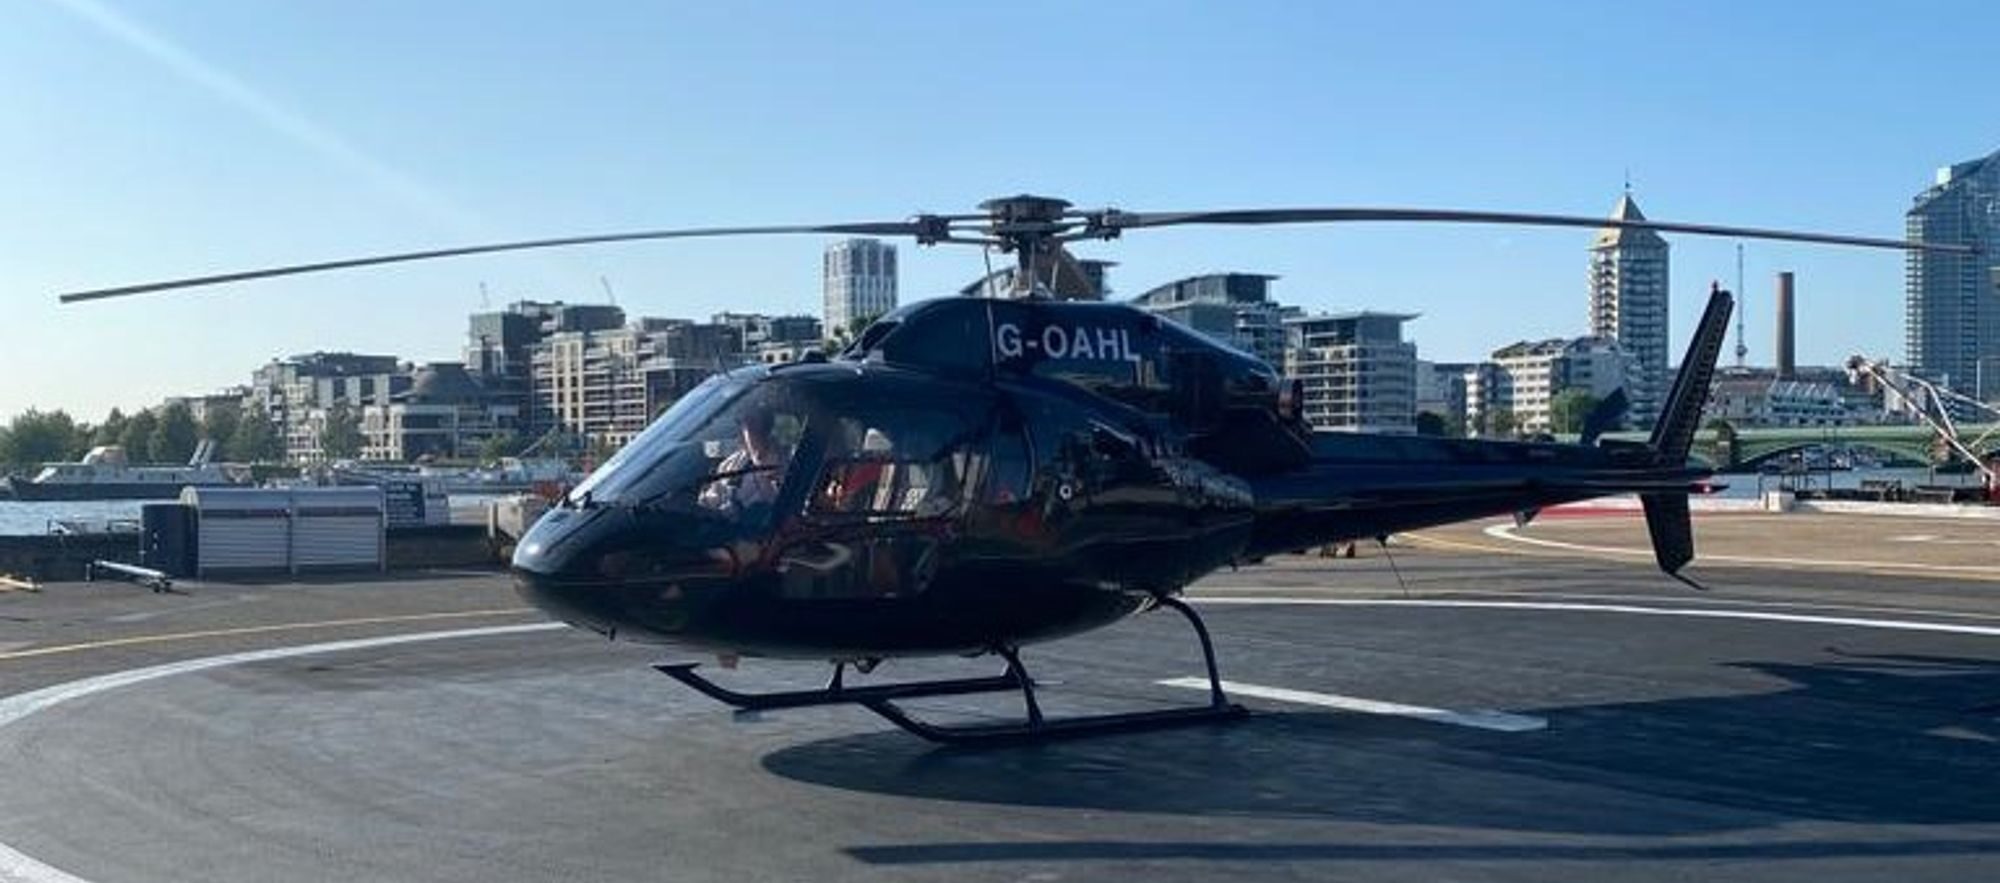 Why CEOs Should Use Helicopter Charter For Business Travel